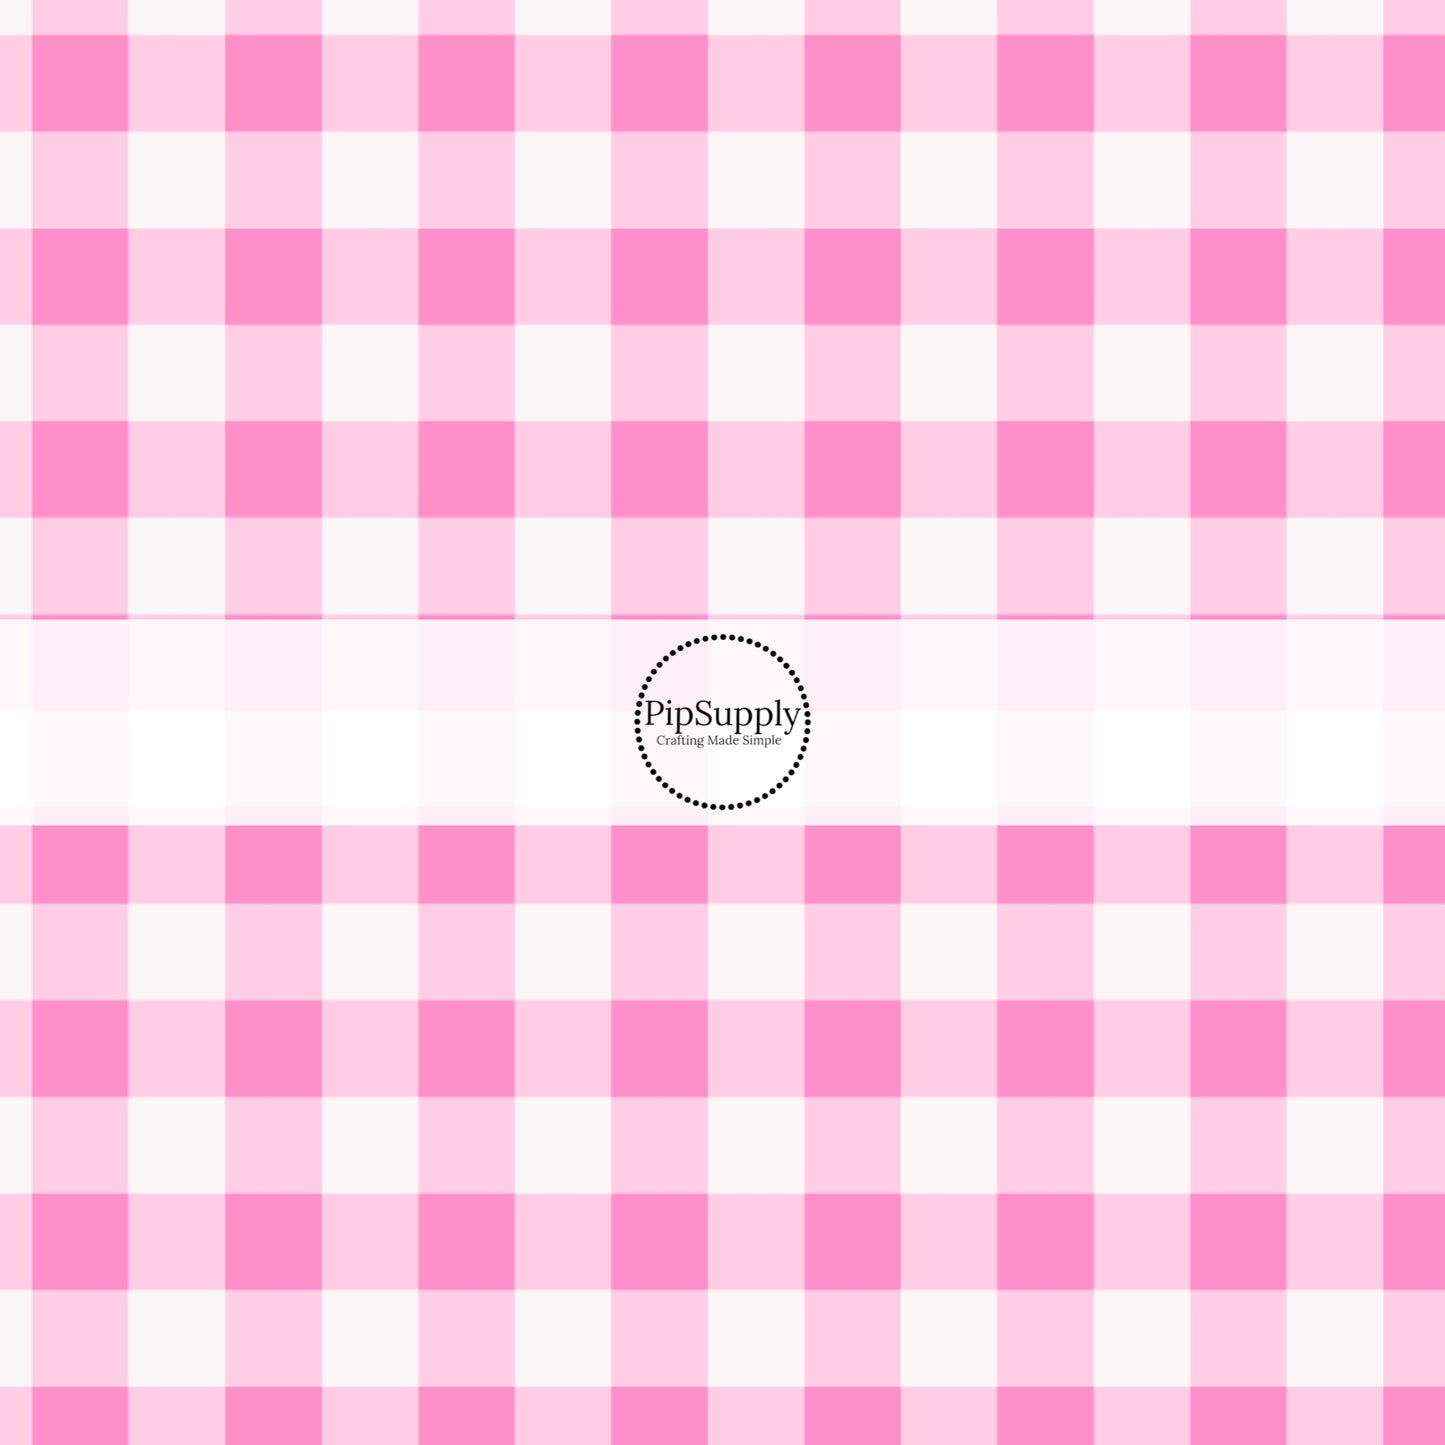 These holiday pattern themed fabric by the yard features light pink and white plaid pattern. This fun Christmas fabric can be used for all your sewing and crafting needs!